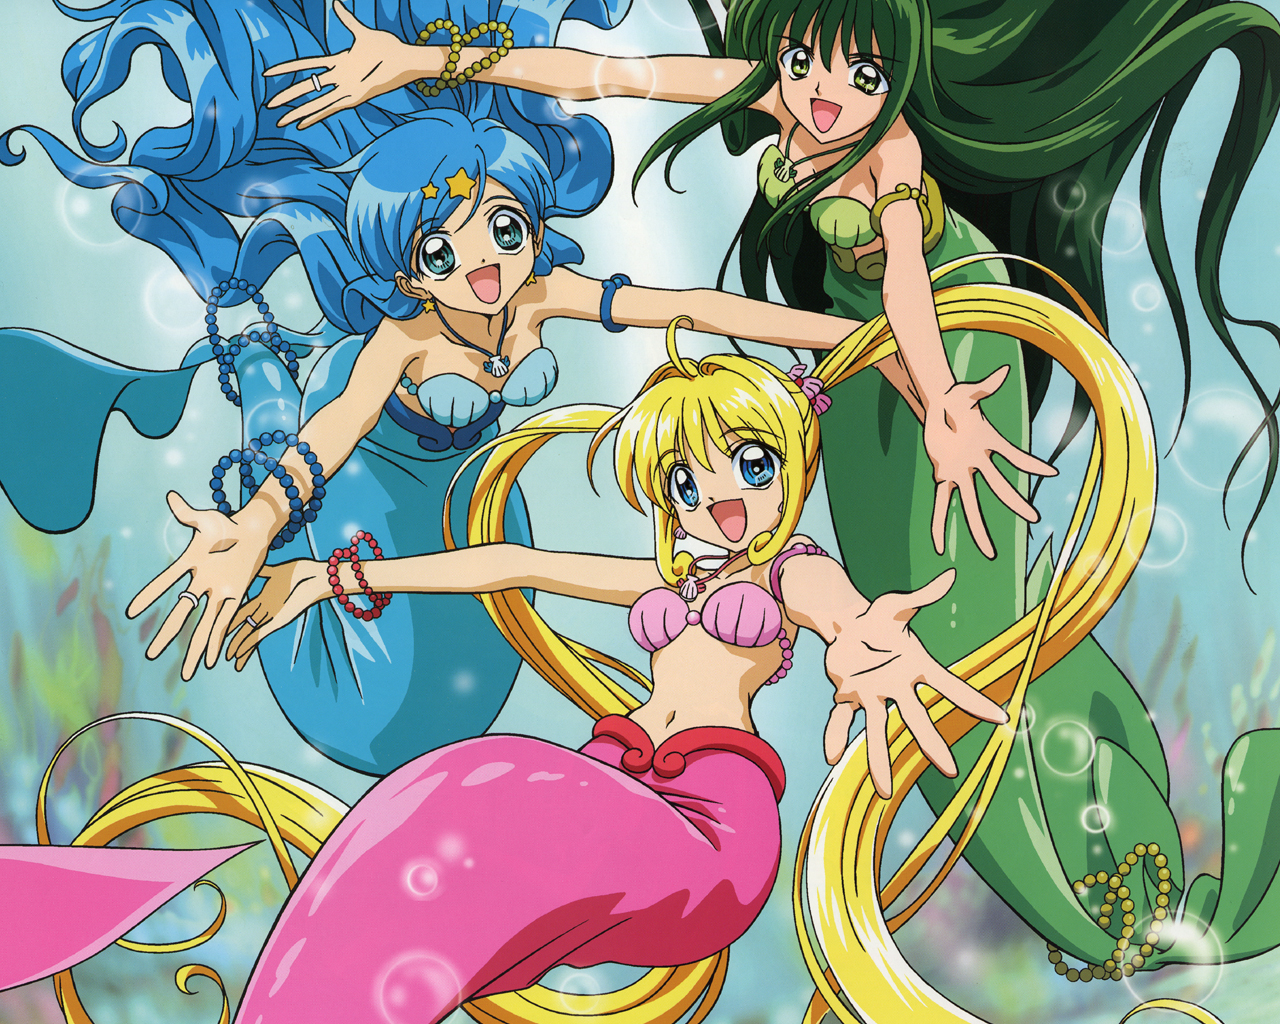 Mermaid Melody (Italian opening and ending theme), Mermaid melody Wiki